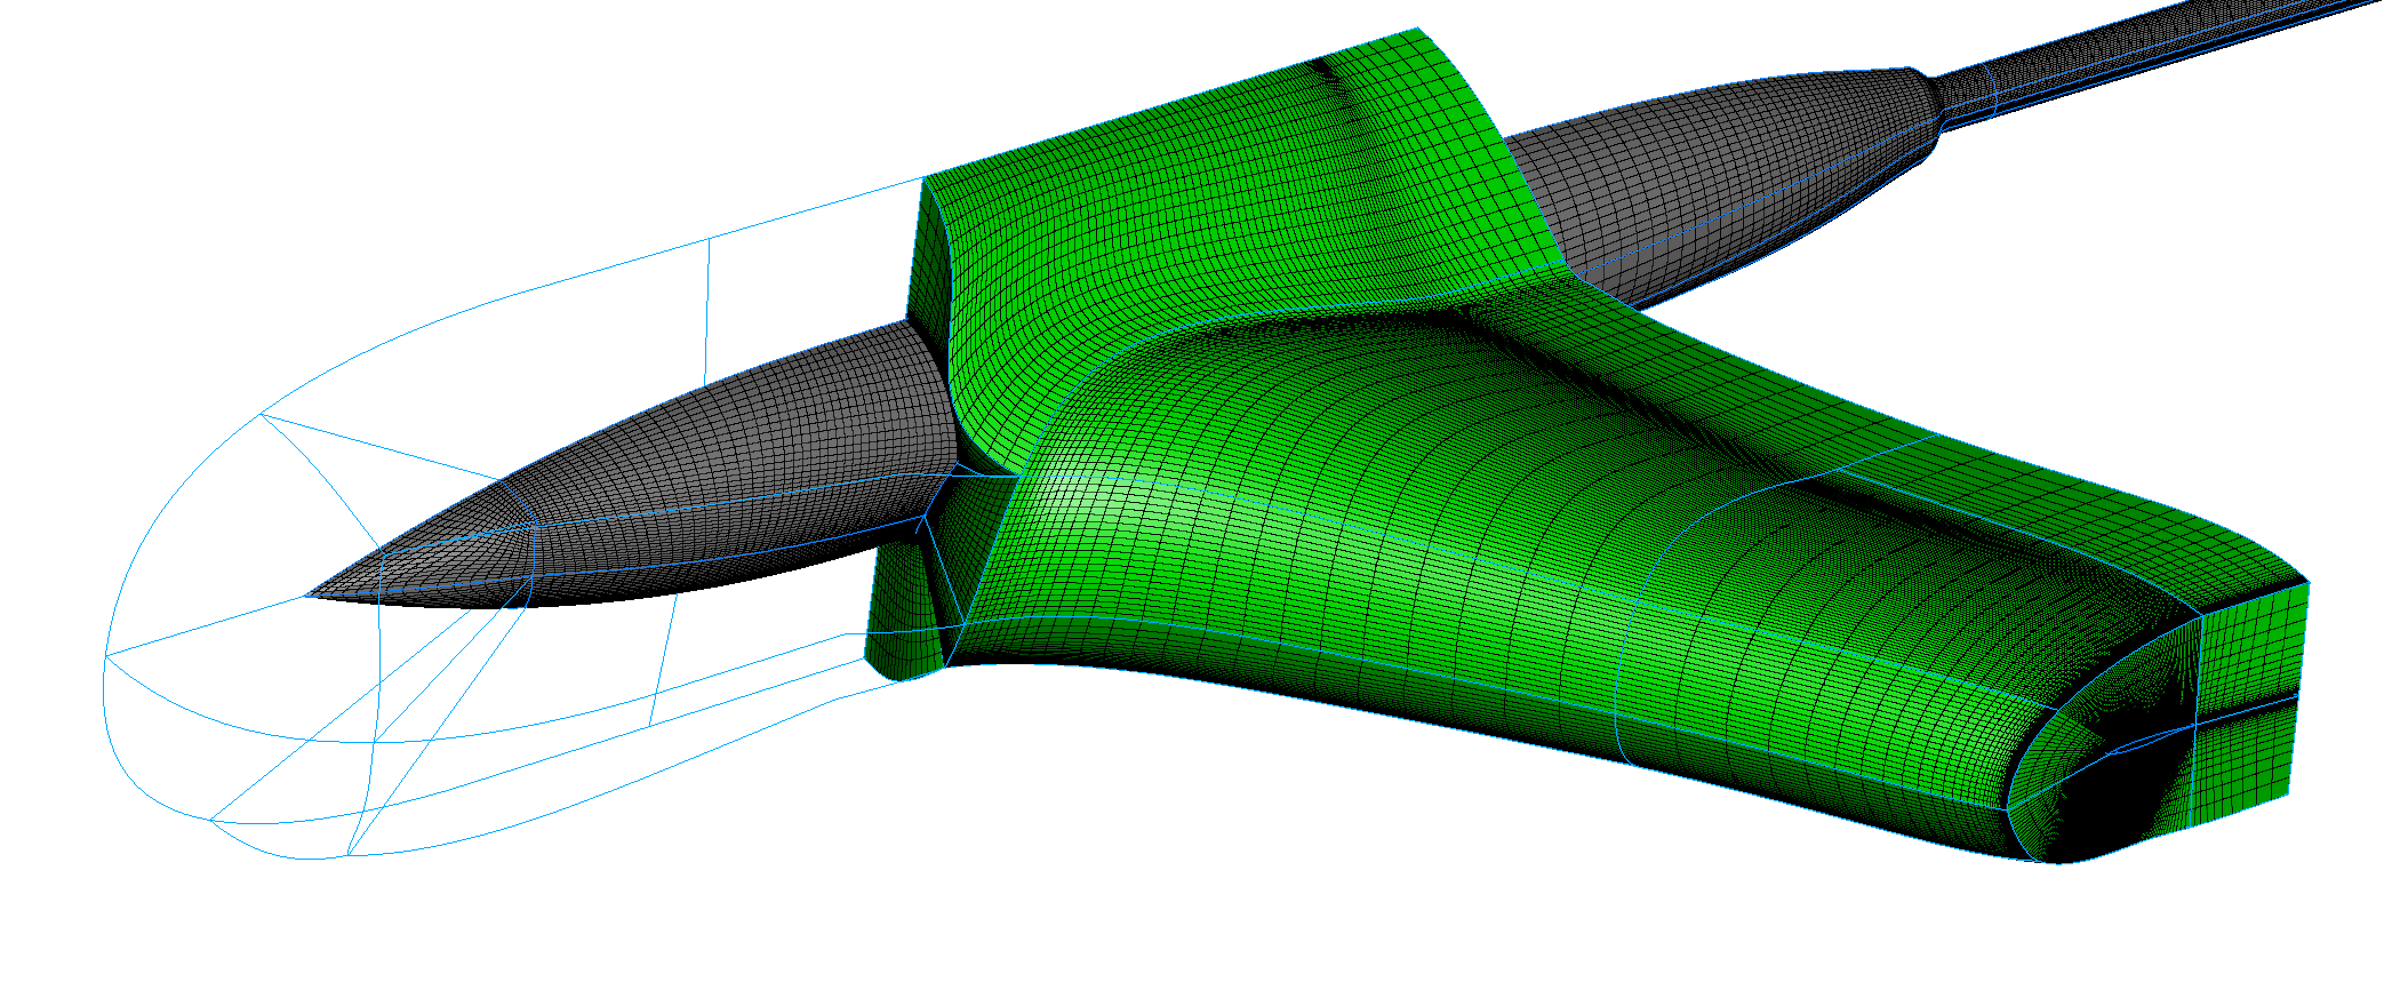 Top 6 Reasons to Choose Structured Grids in CFD Design Engineering